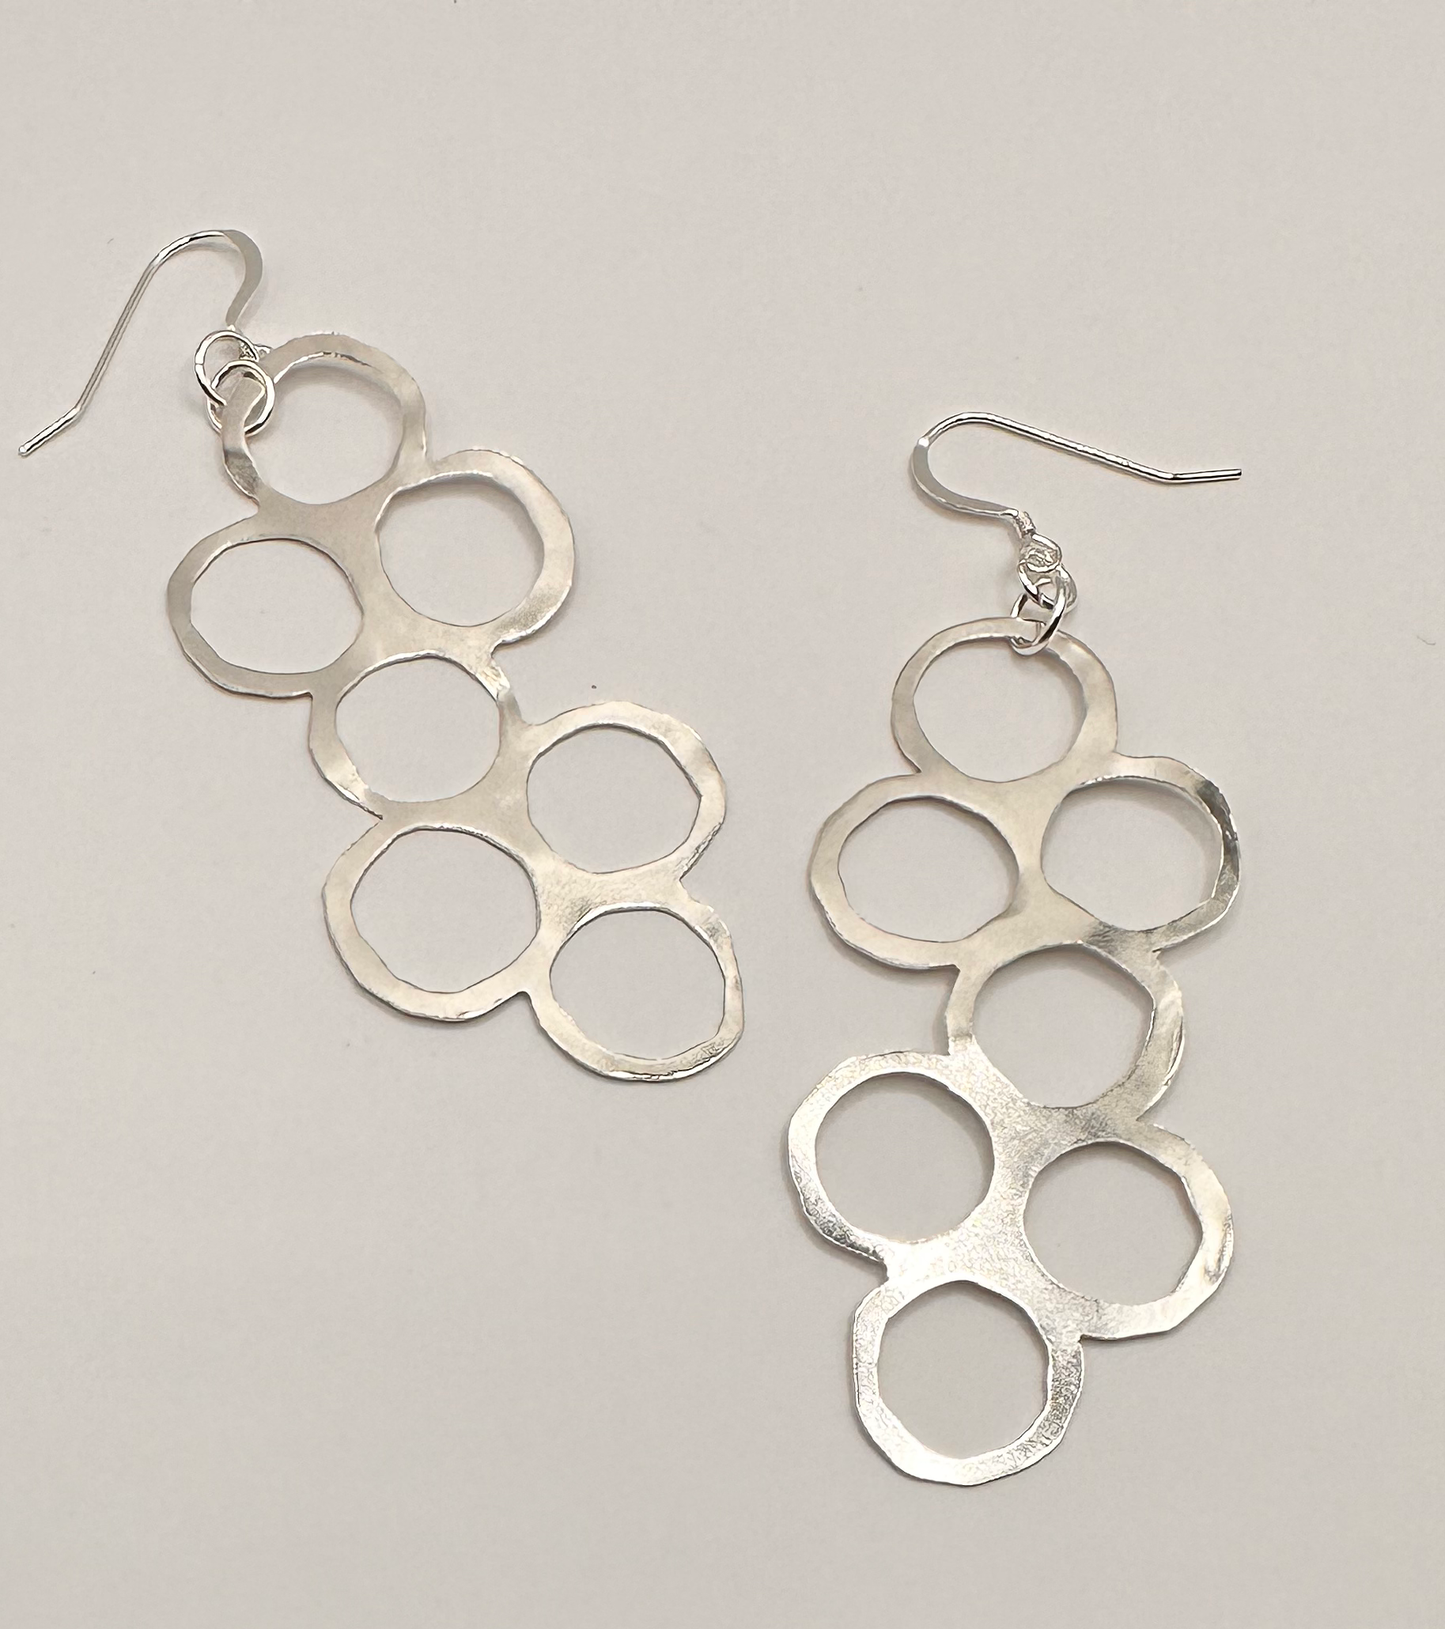 Artisan Handcrafted Sterling Silver Endless Circle Earrings